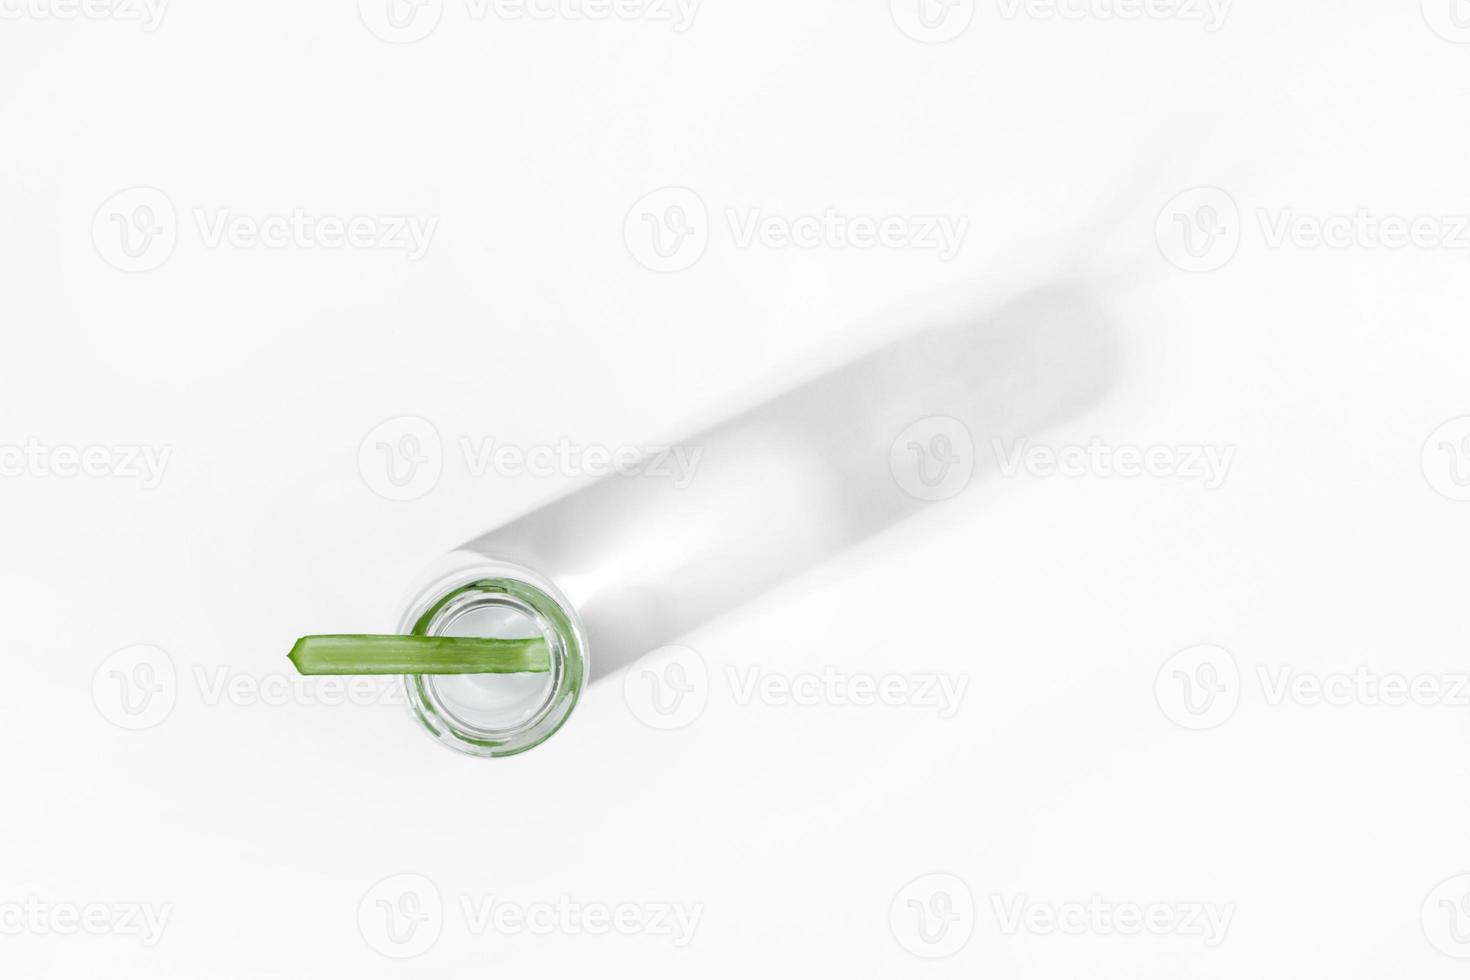 organic cosmetics, natural cosmetics, biofuels, algae. Natural green laboratory. Experiments. Glass laboratory jar with green plants on a light background. photo